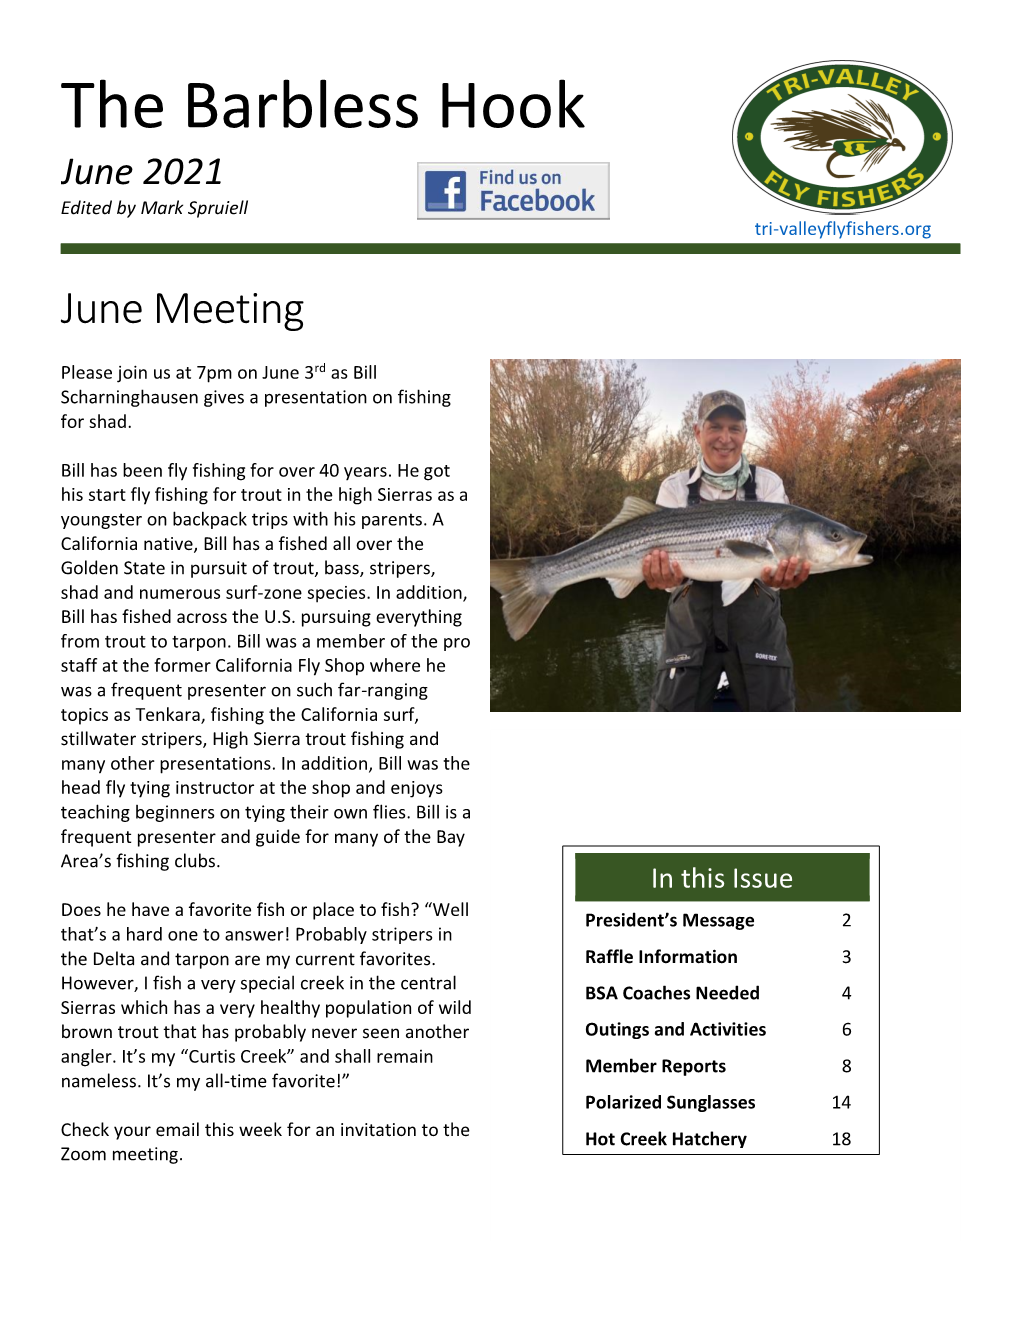 The Barbless Hook June 2021 Edited by Mark Spruiell Tri-Valleyflyfishers.Org